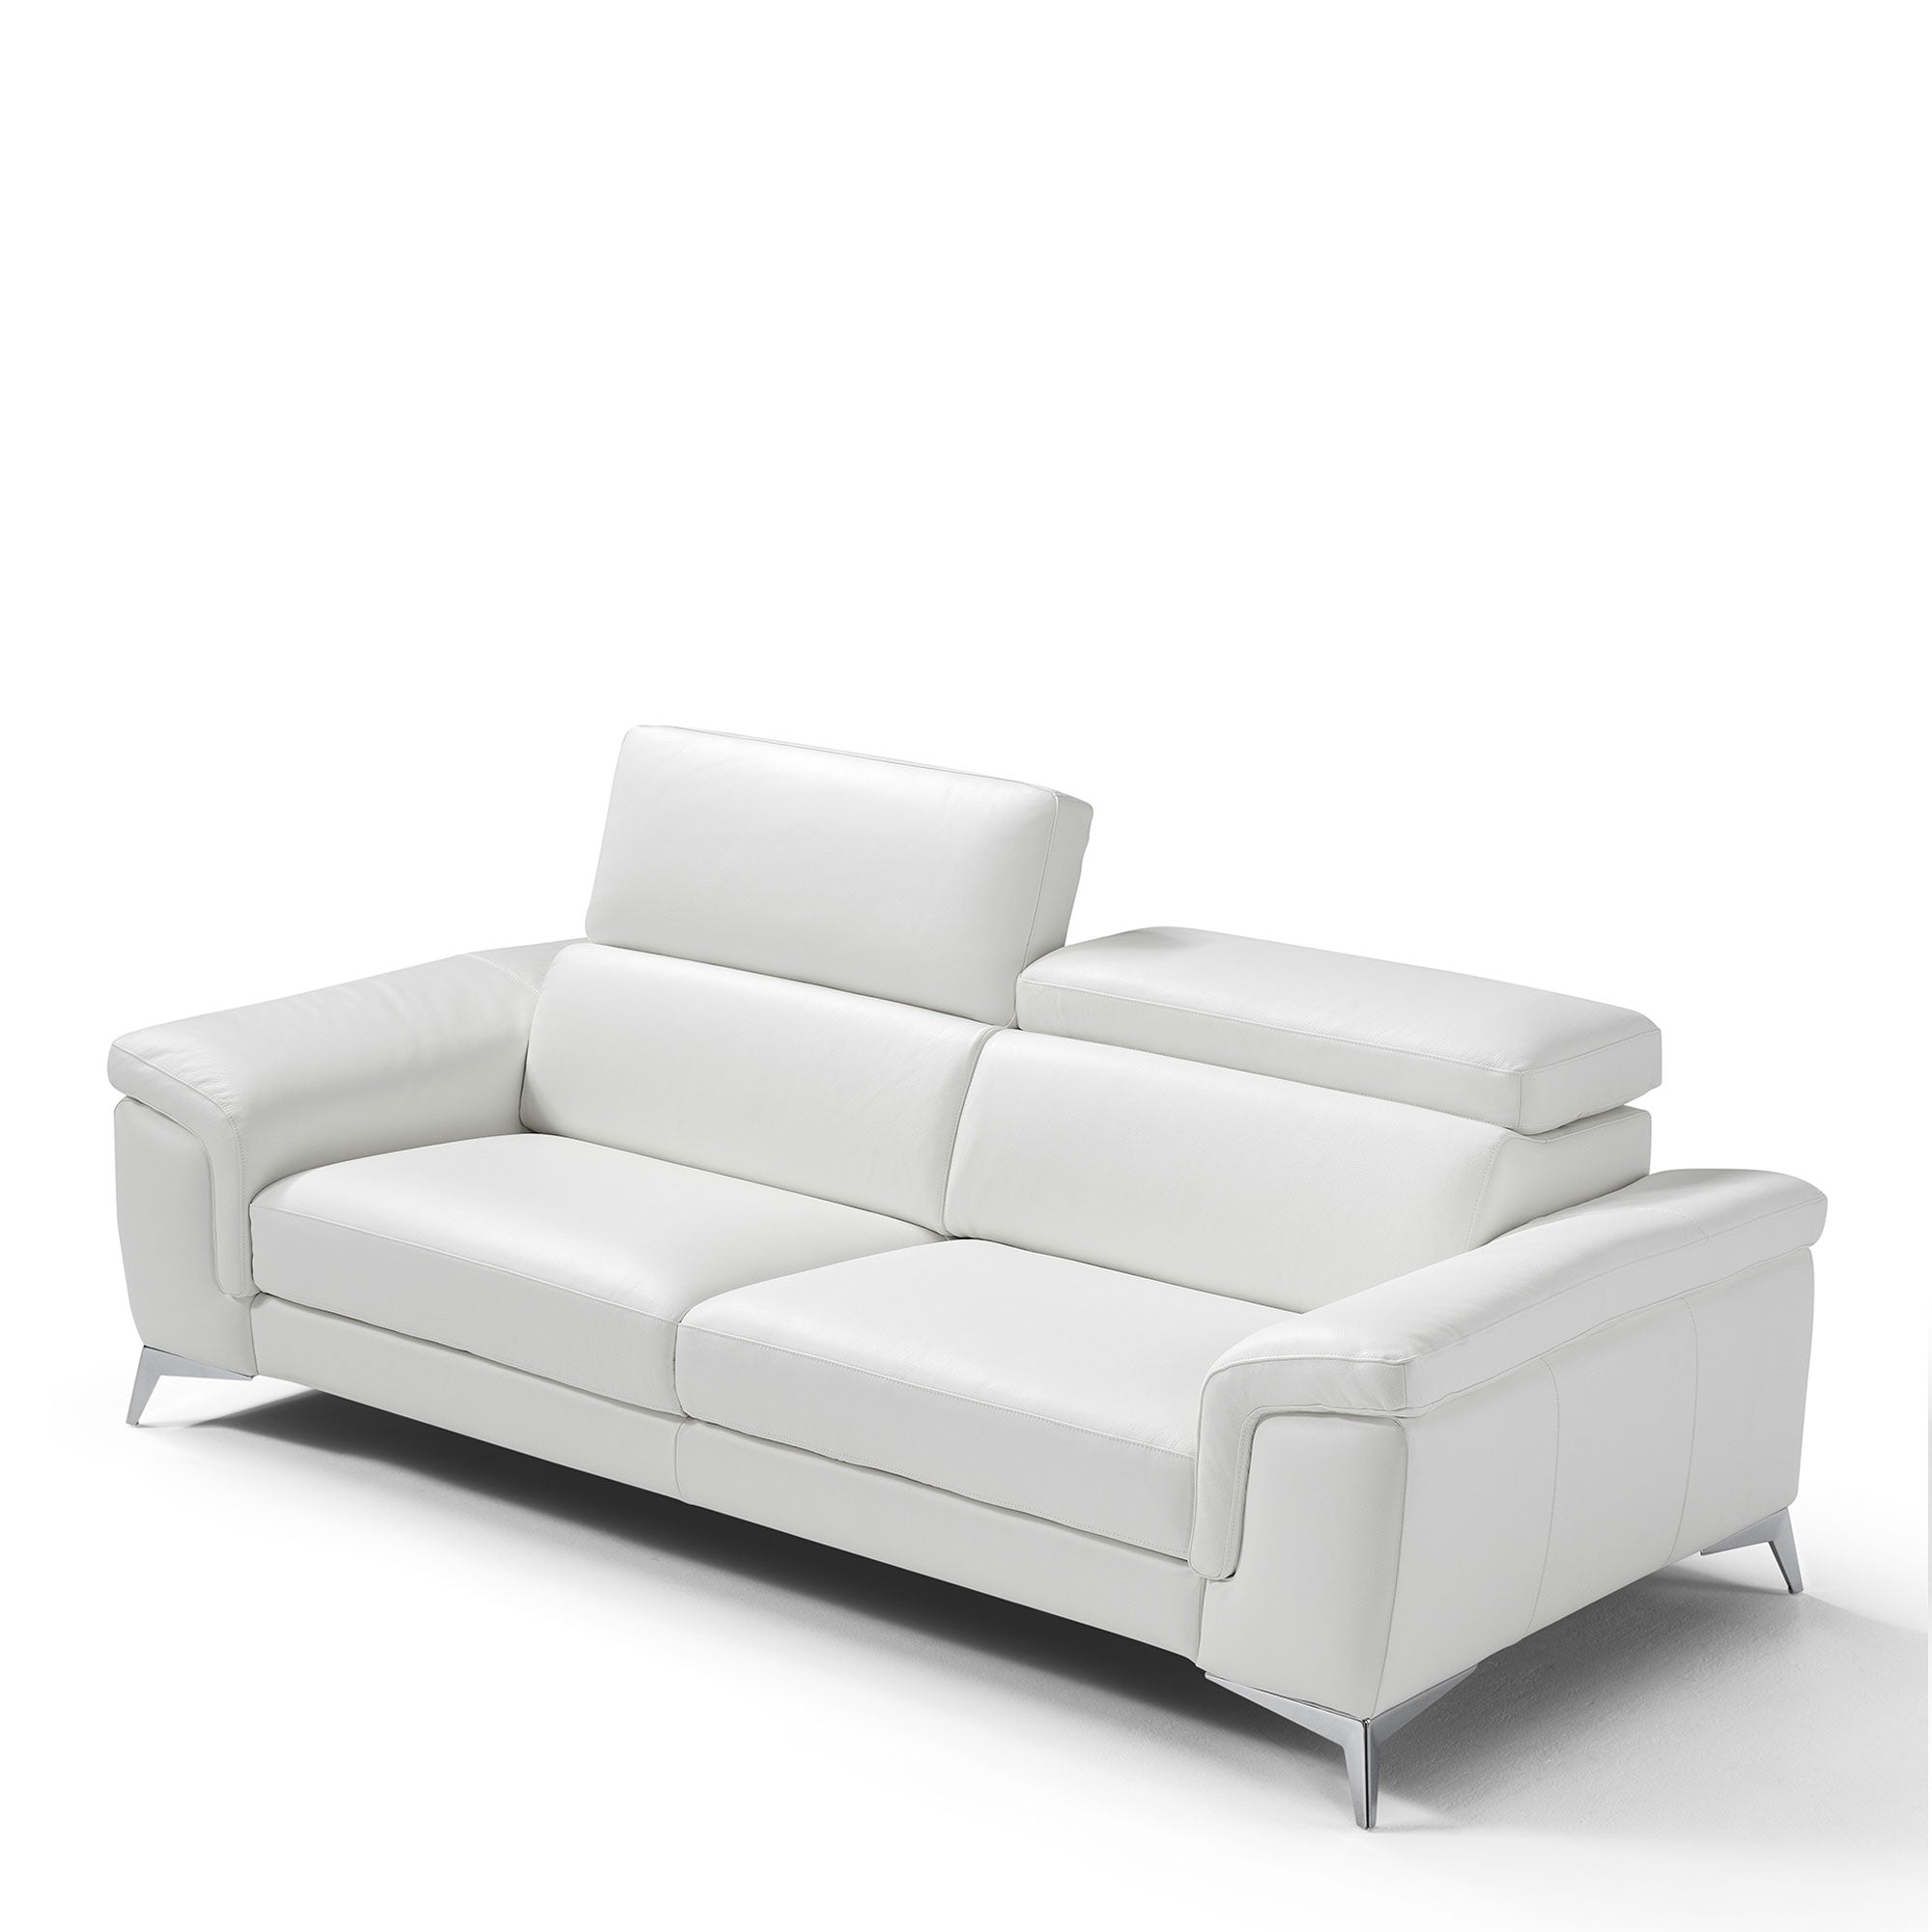 Portofino - 3 Seat Sofa With 2 Power Recliners In Leather Cat L15